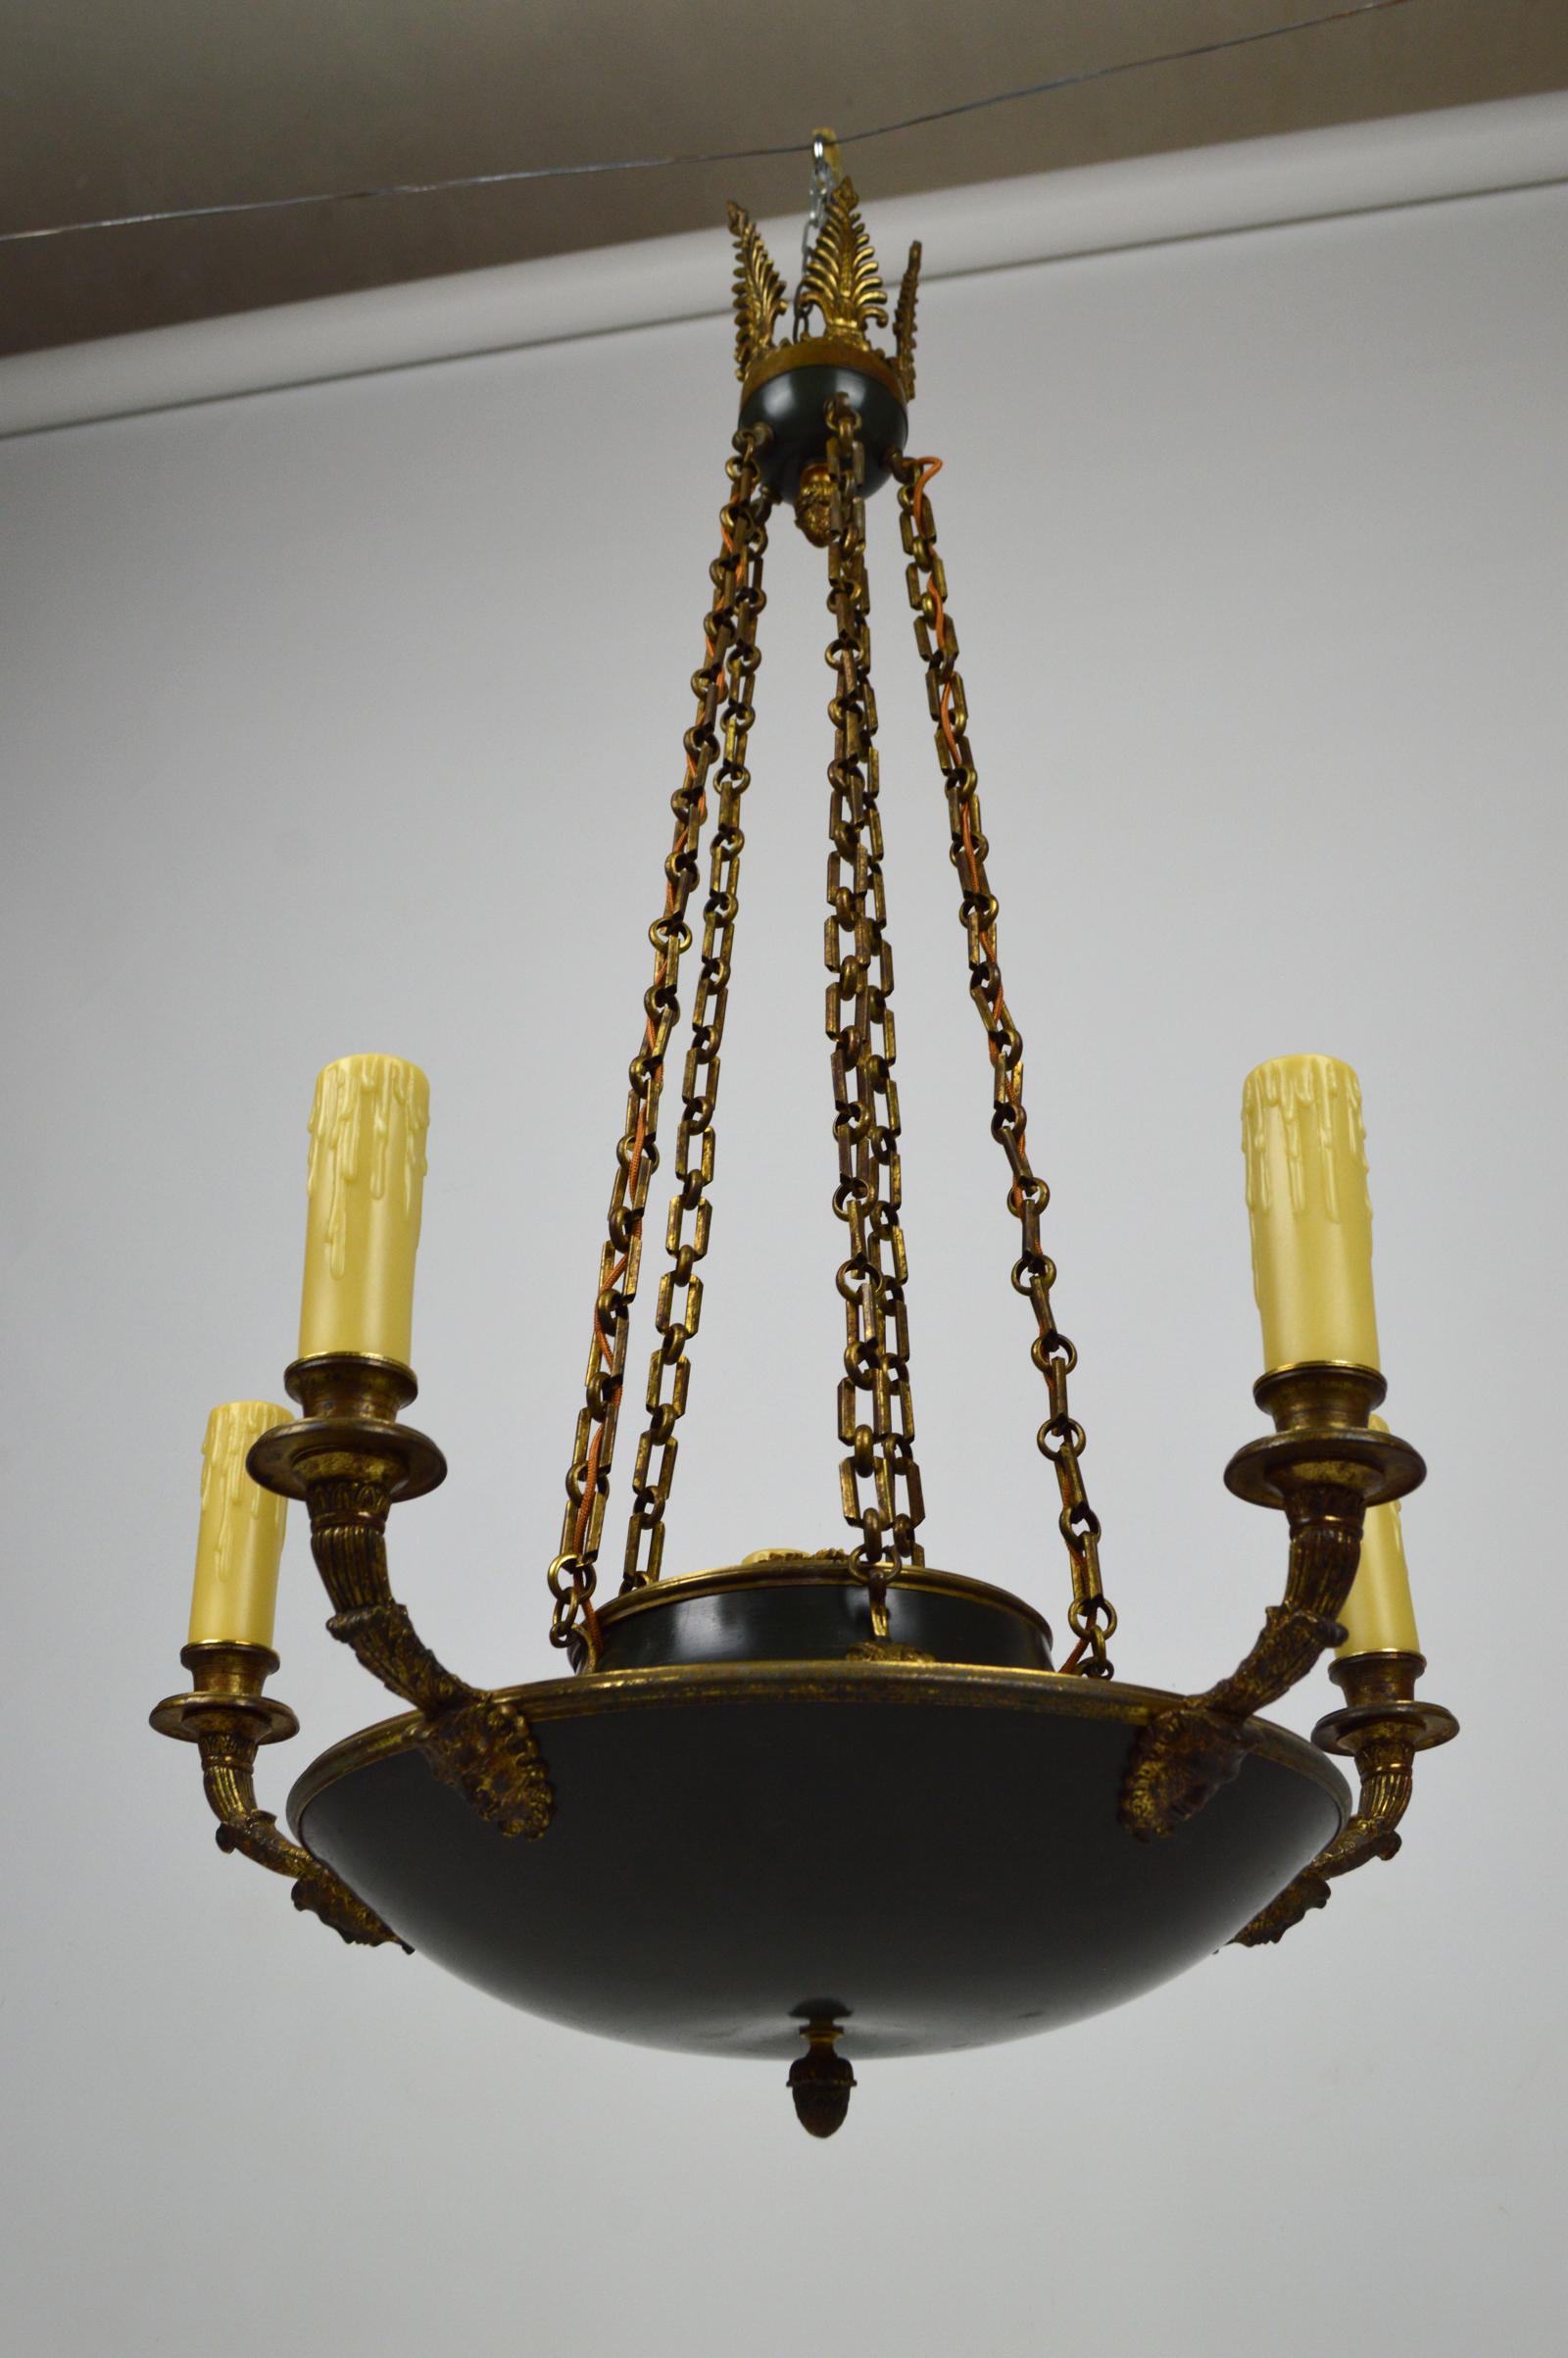 Antique French Empire Chandelier in Patinated Bronze, 19th Century For Sale 1